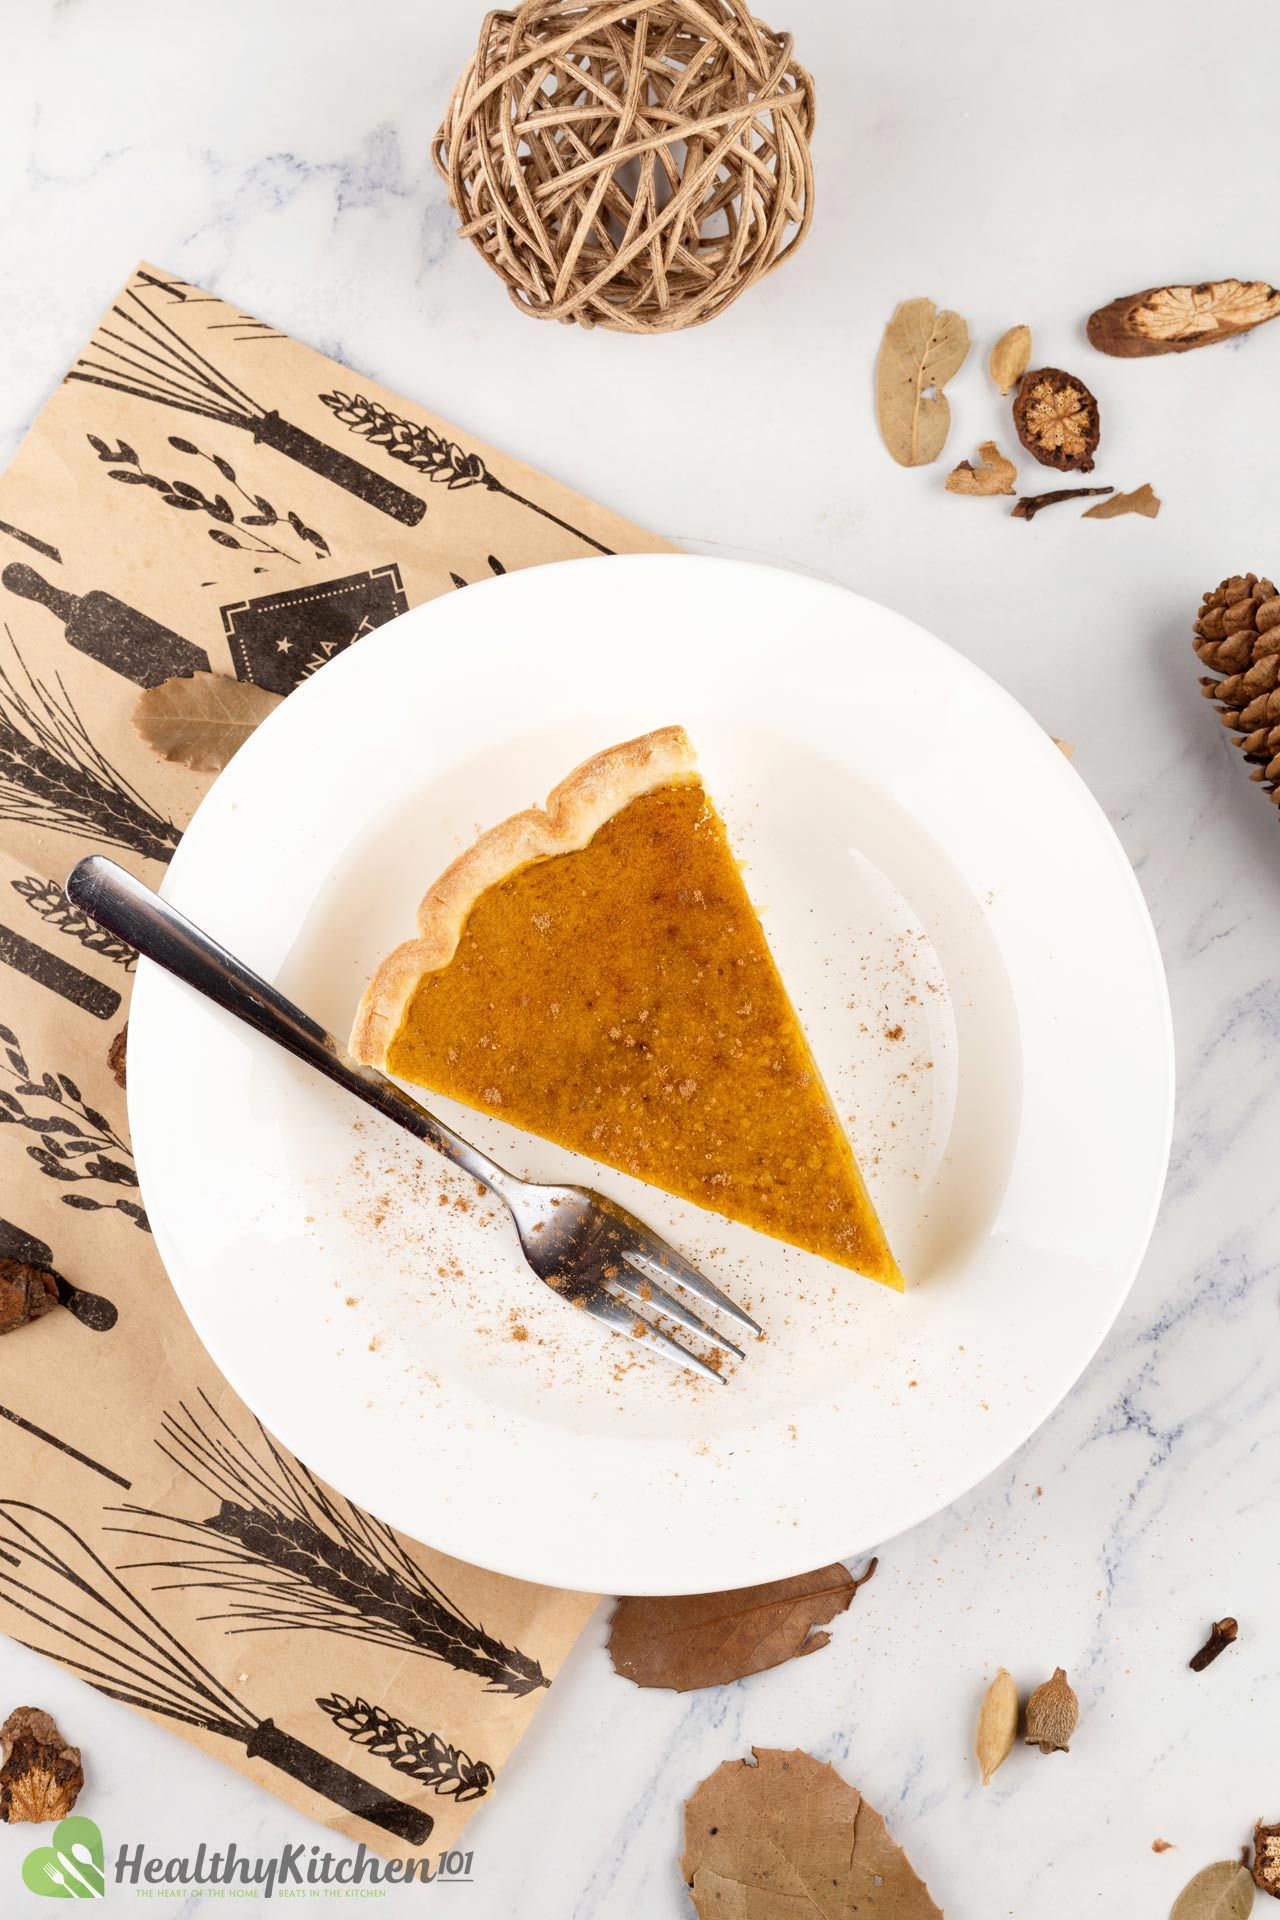 Should Pumpkin Pie be Served Warm or Cold